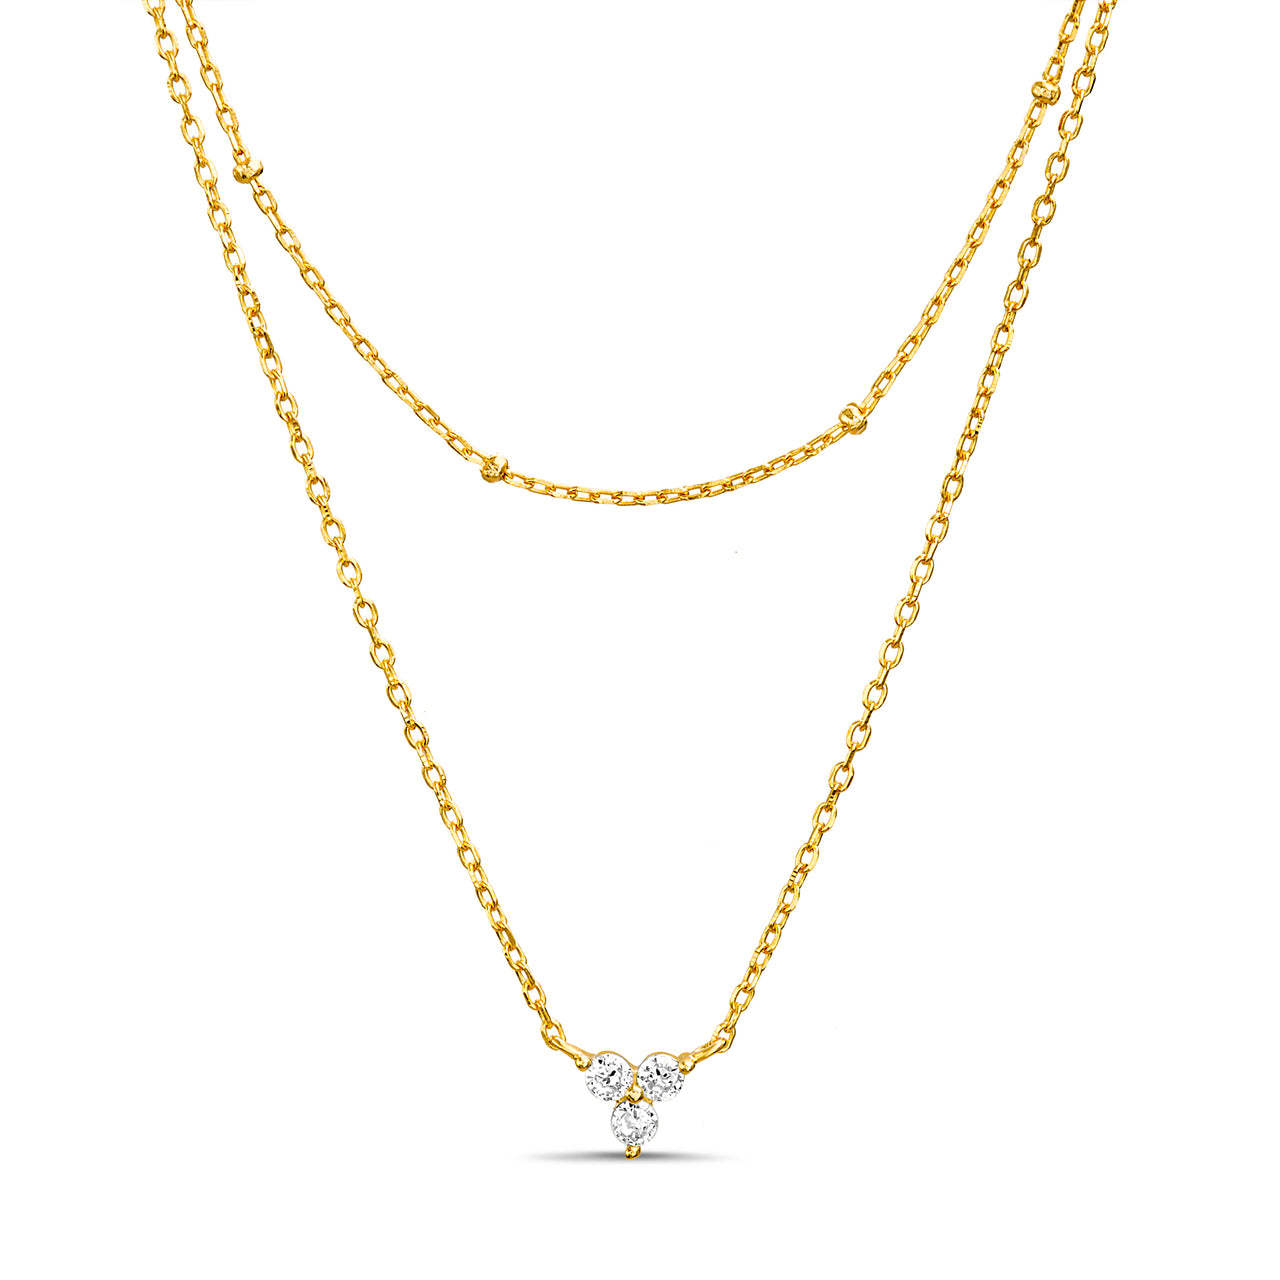 Lesa Michele Yellow Gold Plated Sterling Silver Layered Cubic Zirconia Necklace